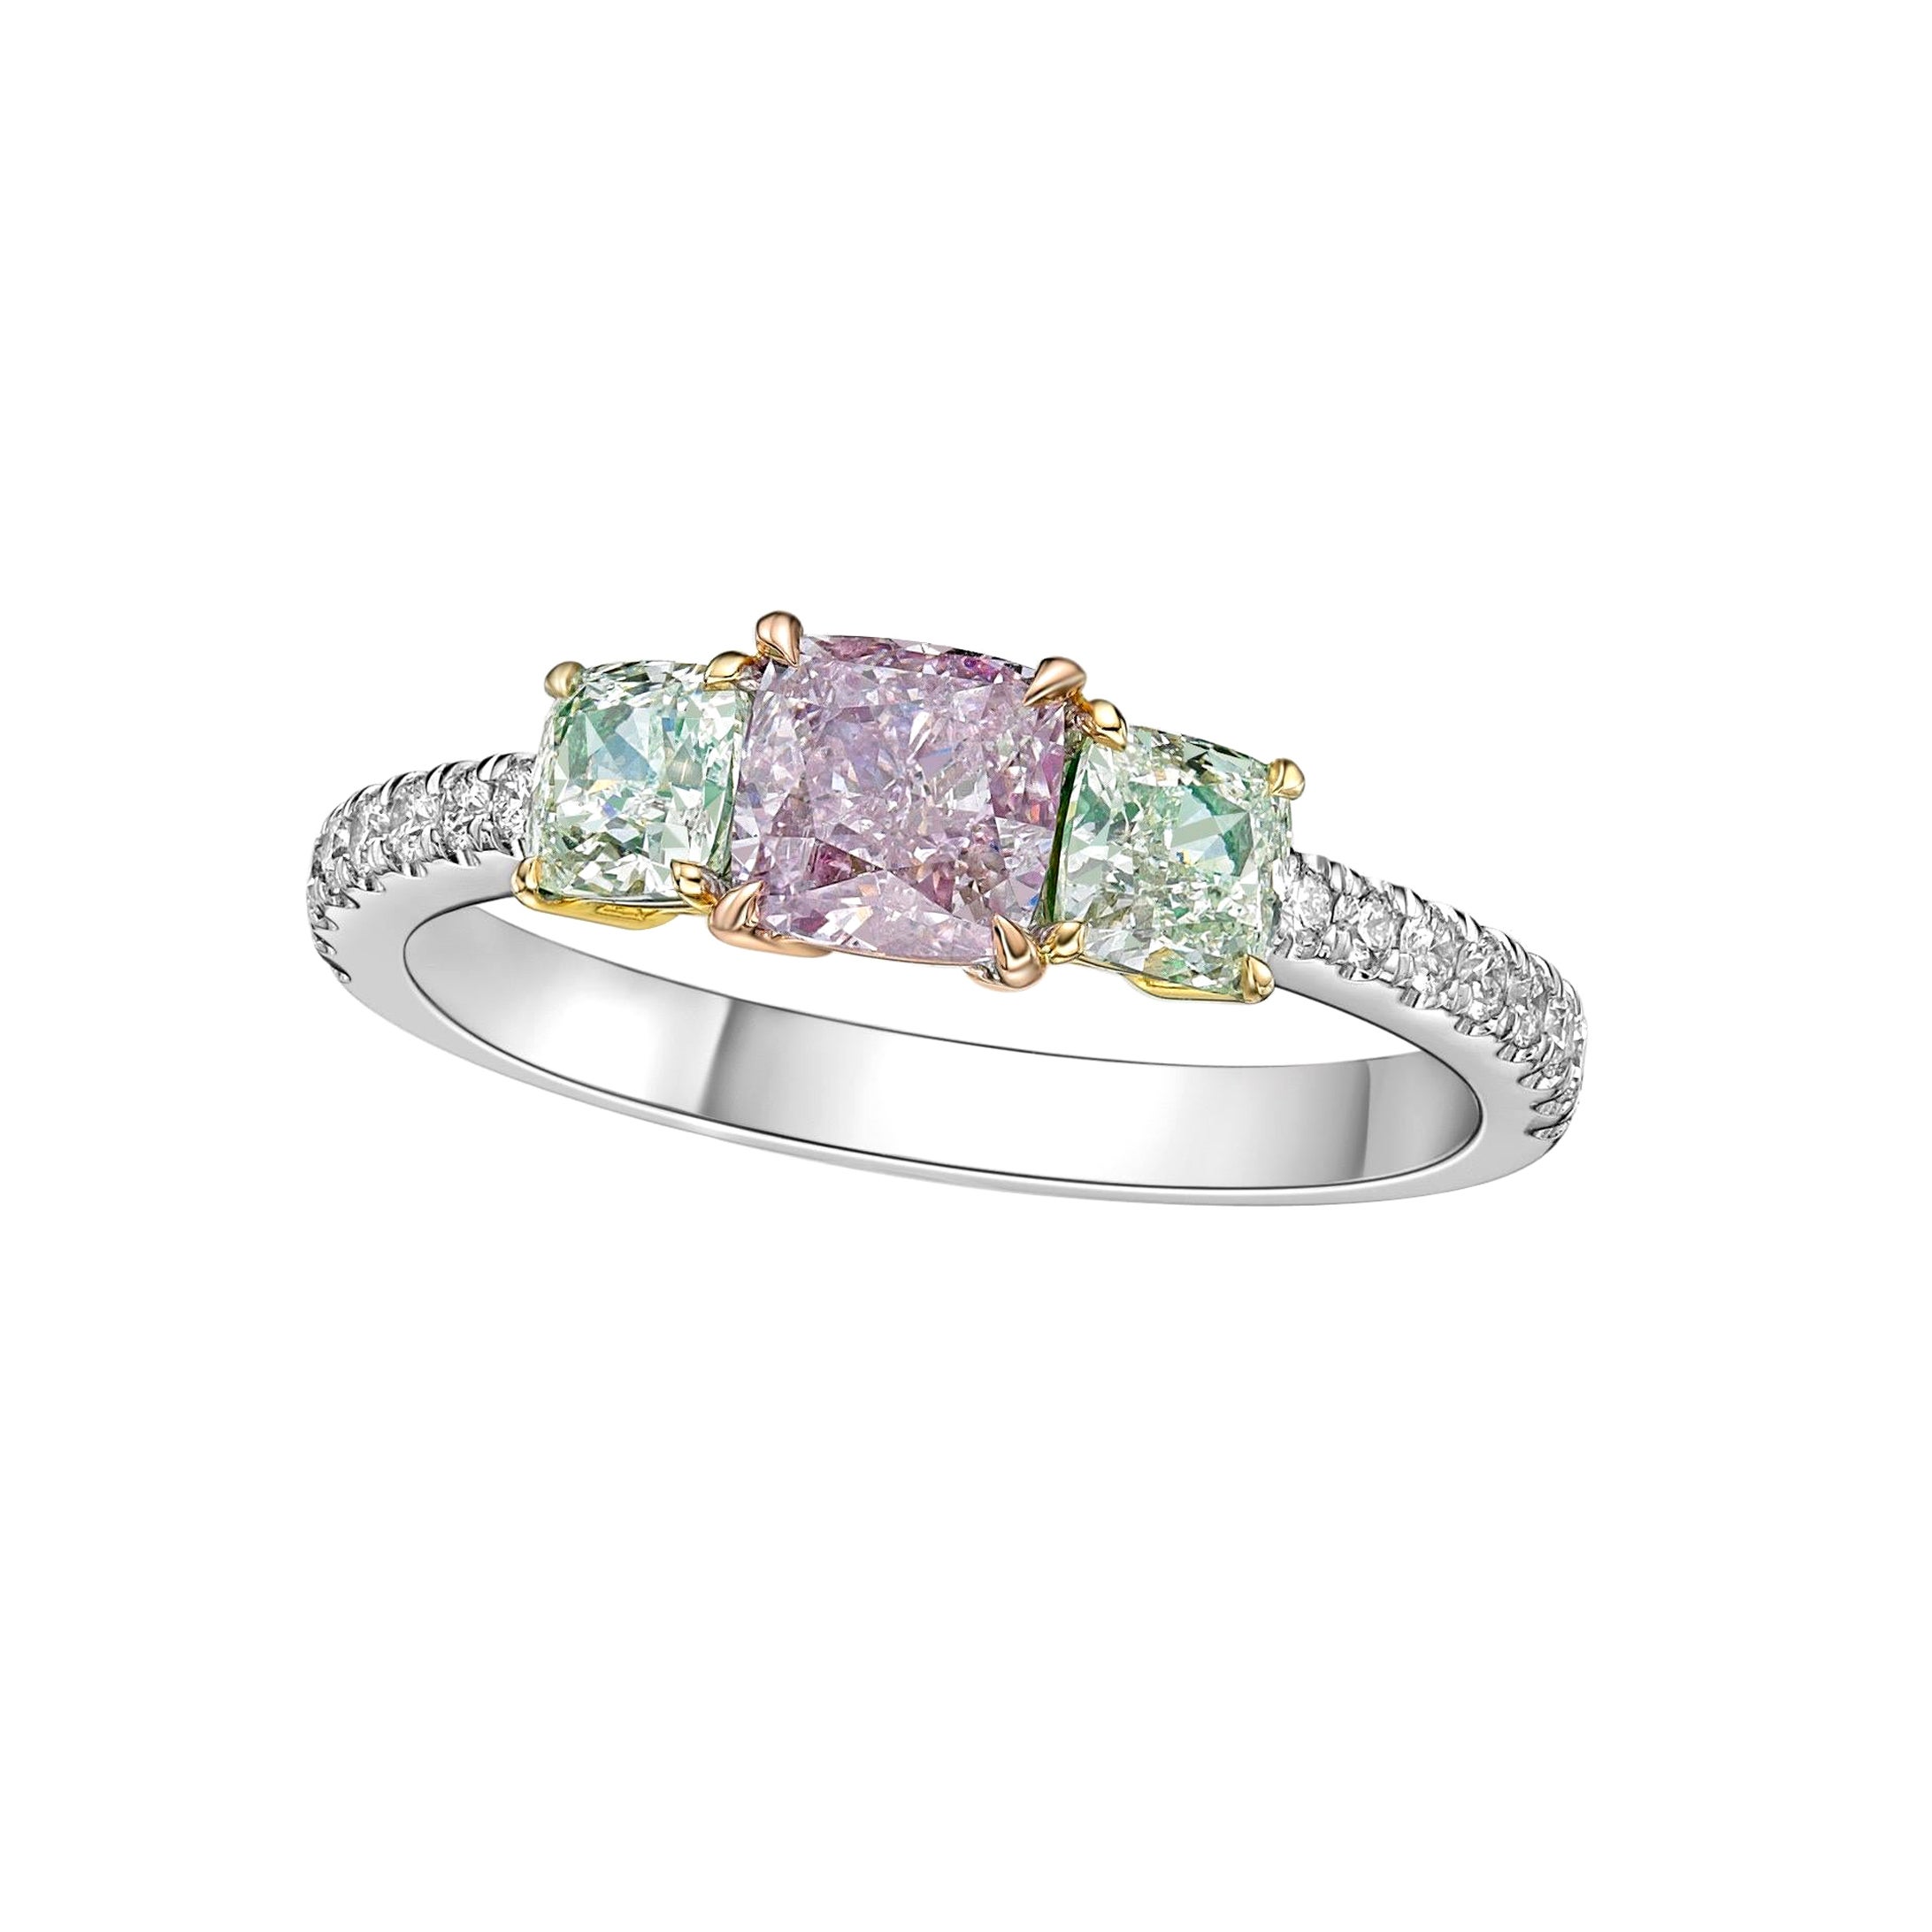 Emilio Jewelry Gia Certified 1.59 Carat Exotic Fancy Pink Green Diamond Ring For Sale